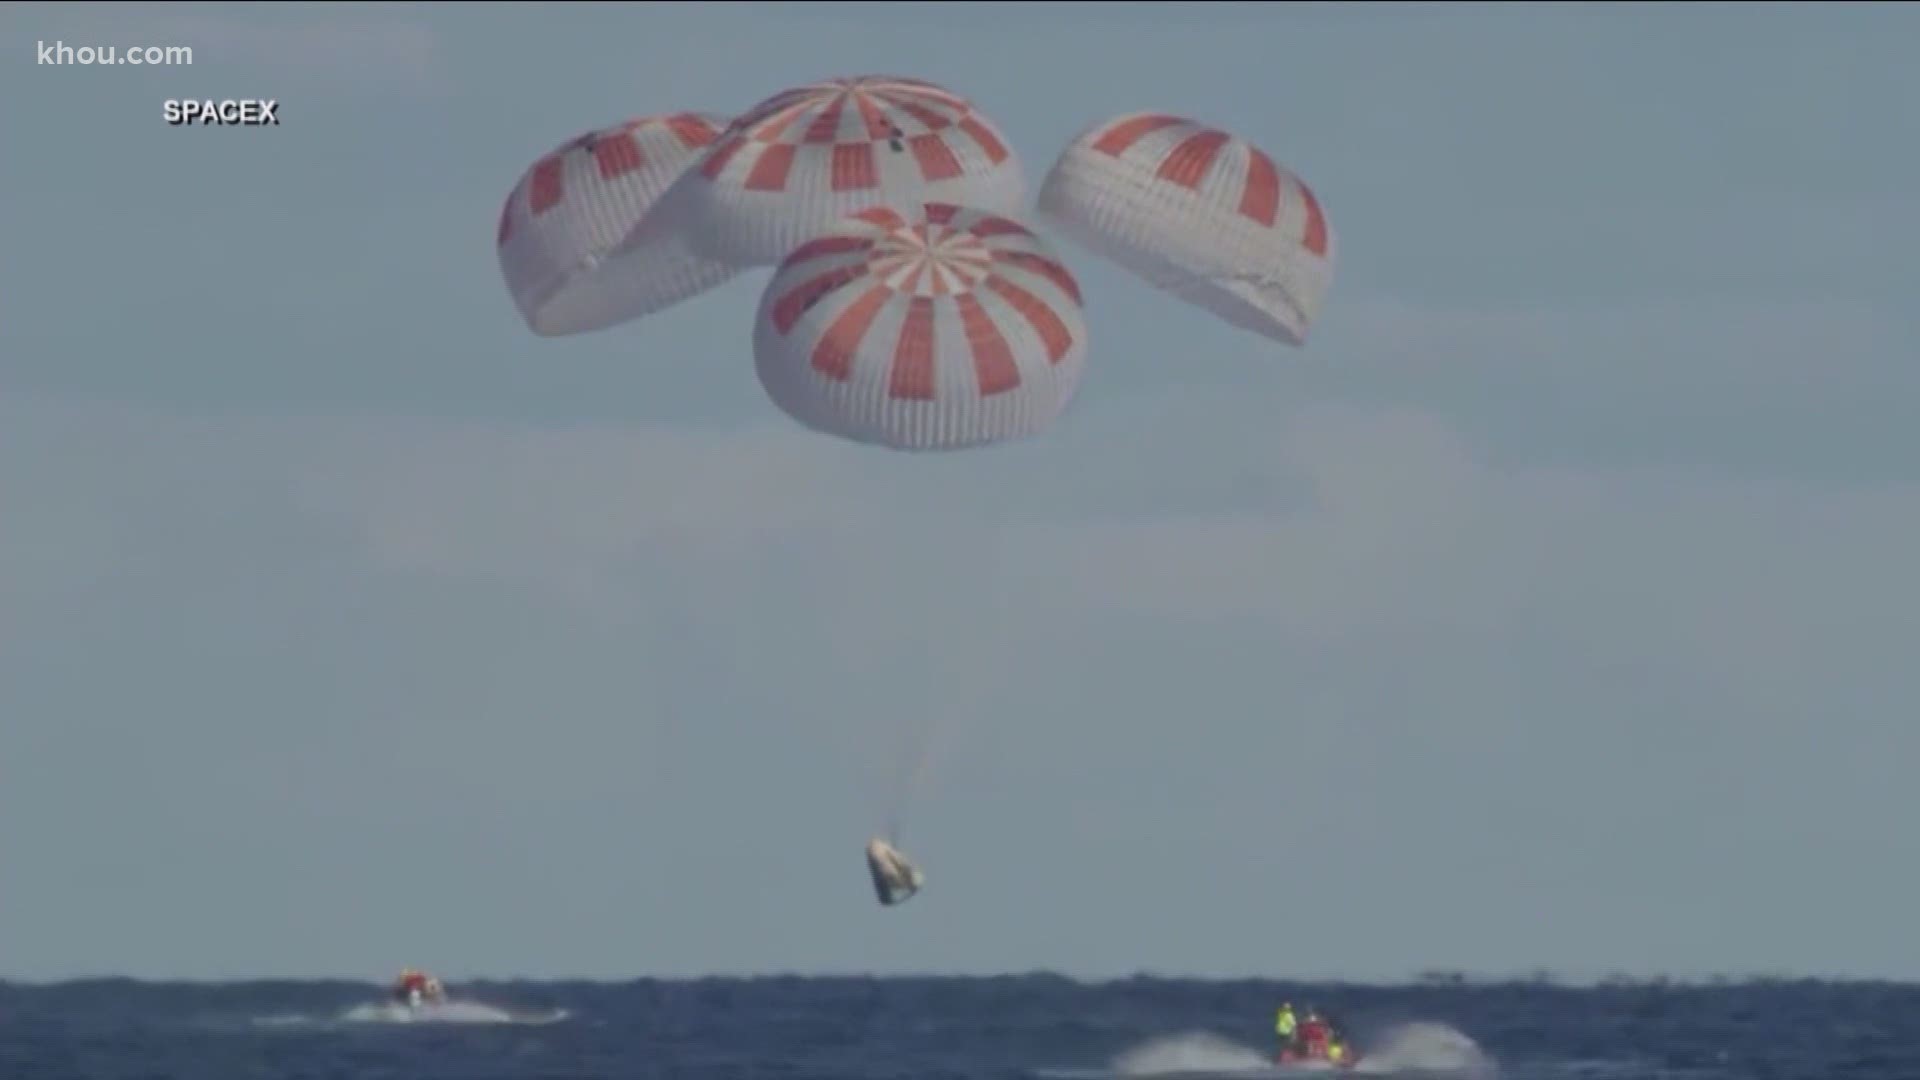 It was the first splashdown by U.S. astronauts in 45 years, with the first commercially built and operated spacecraft to carry people to and from orbit.